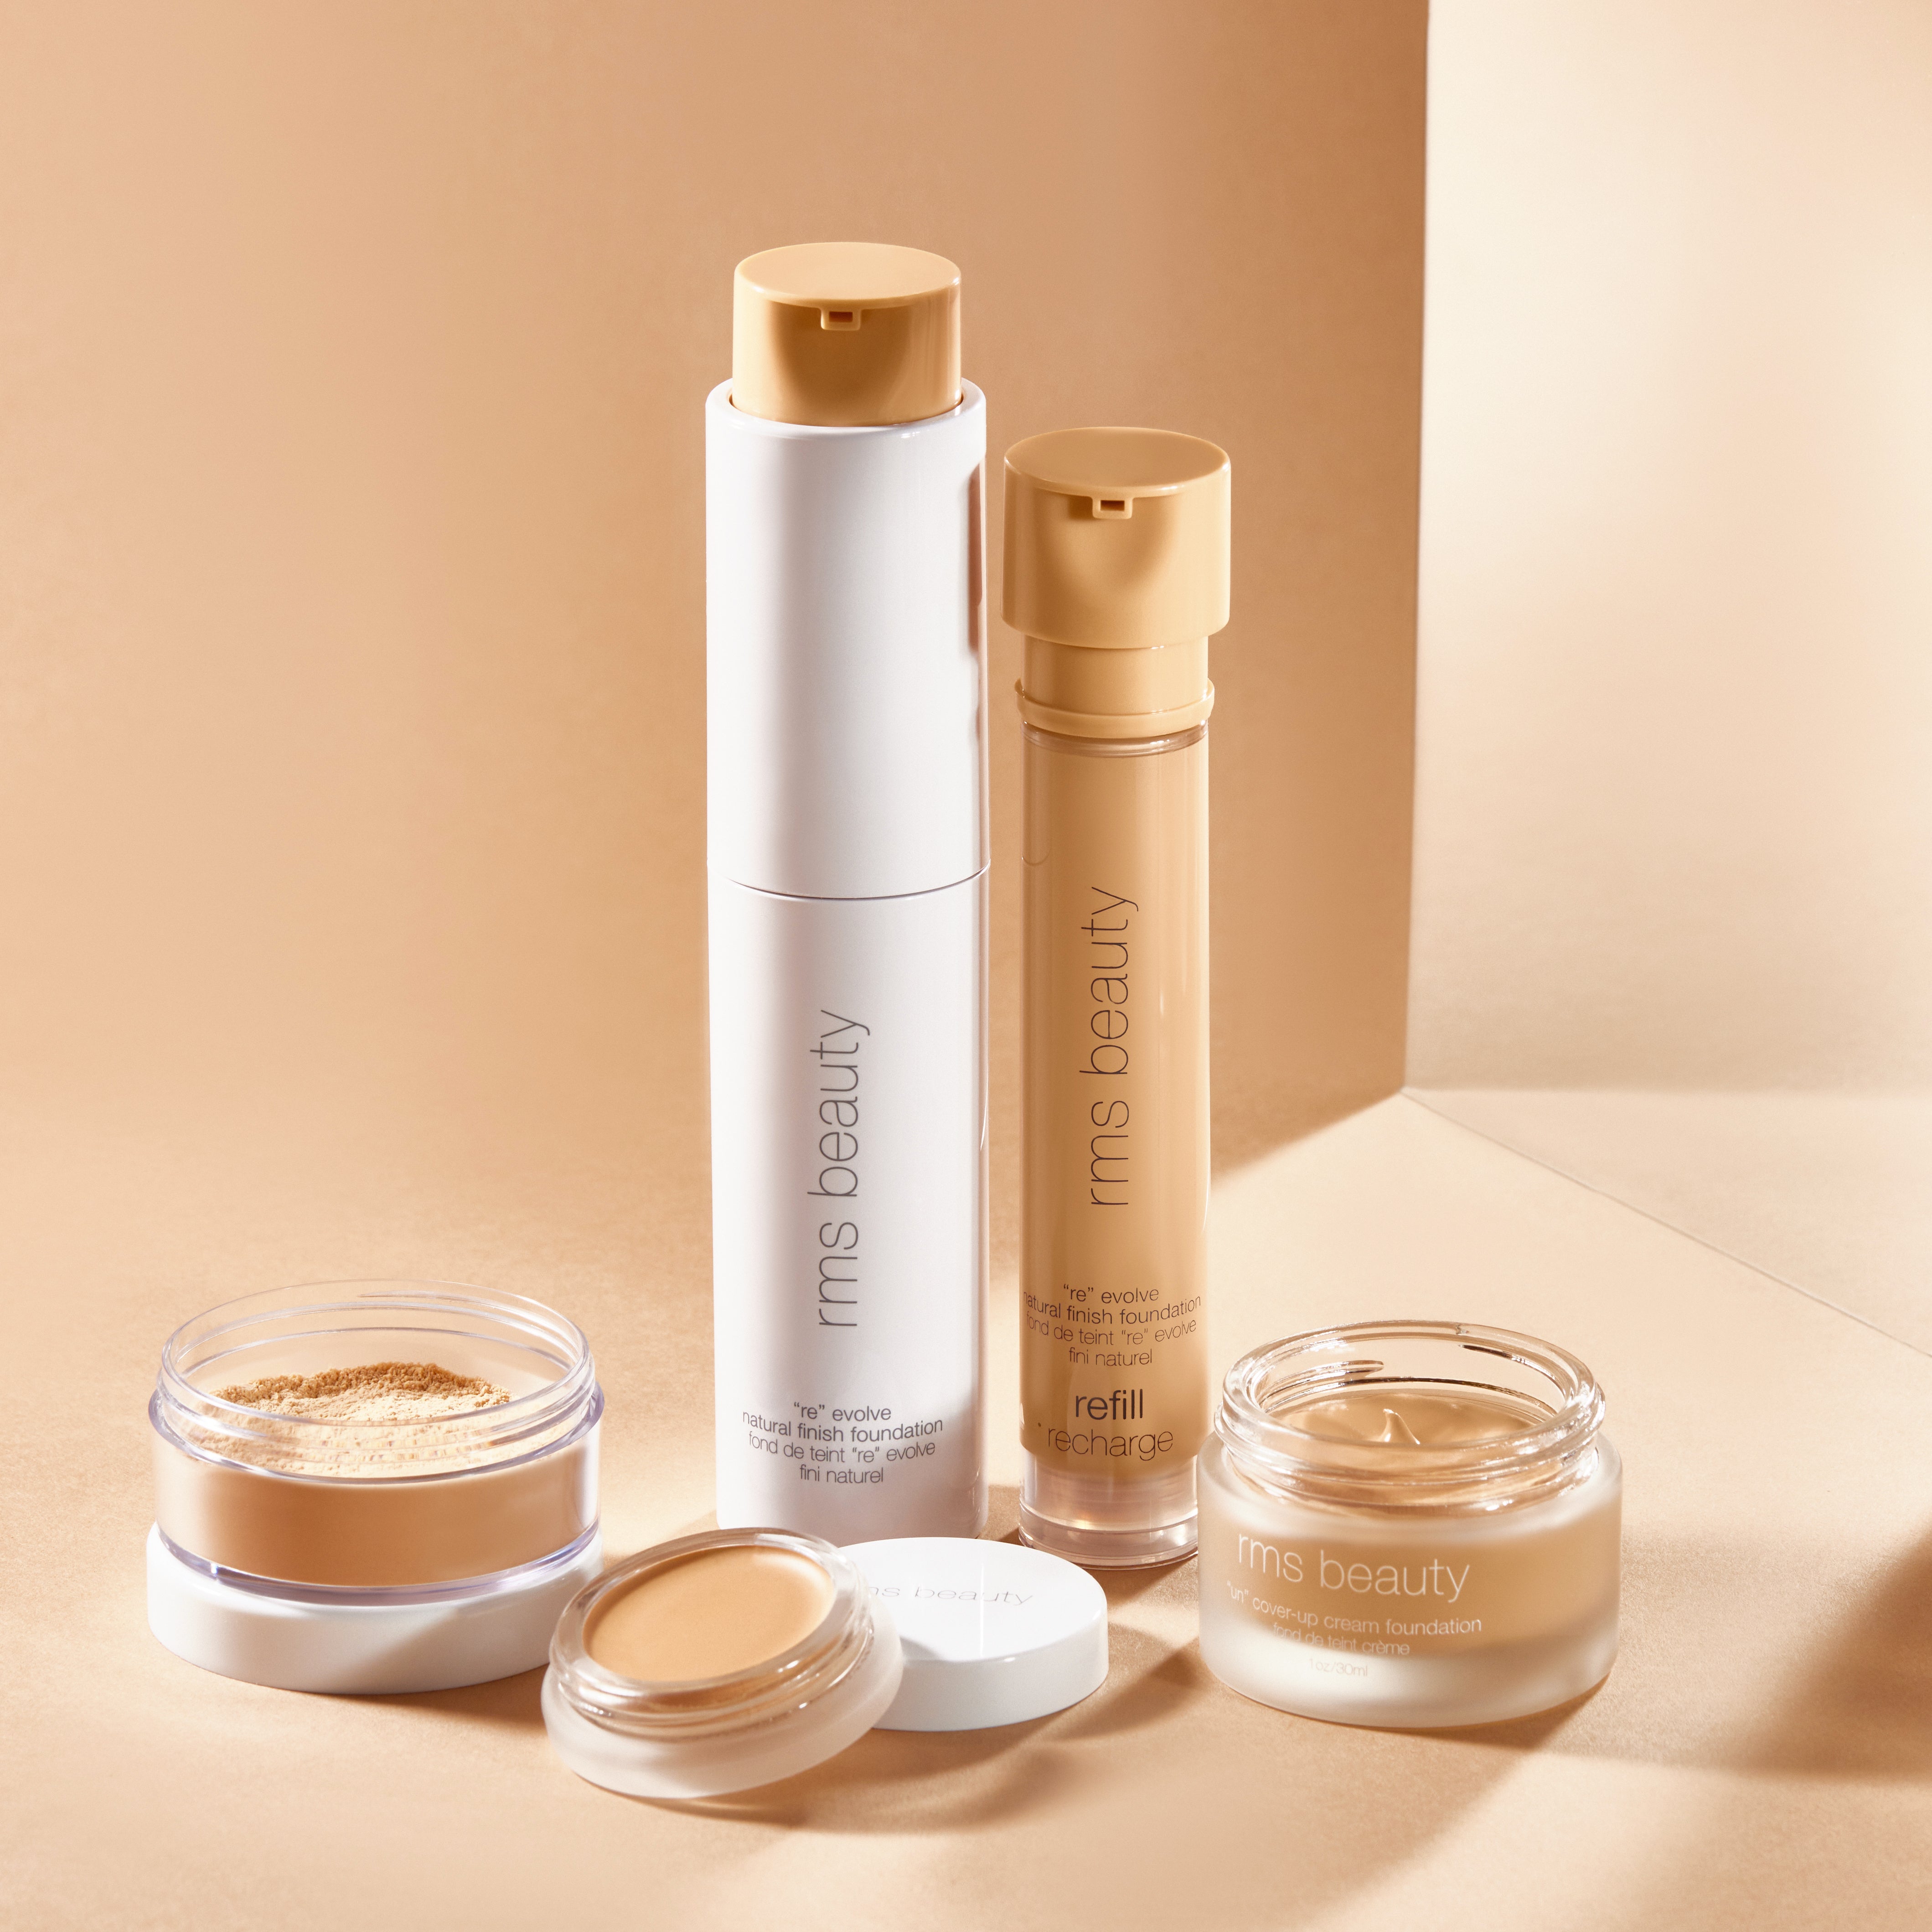 Choosing The Right RMS Beauty Foundation For Your Skin Type